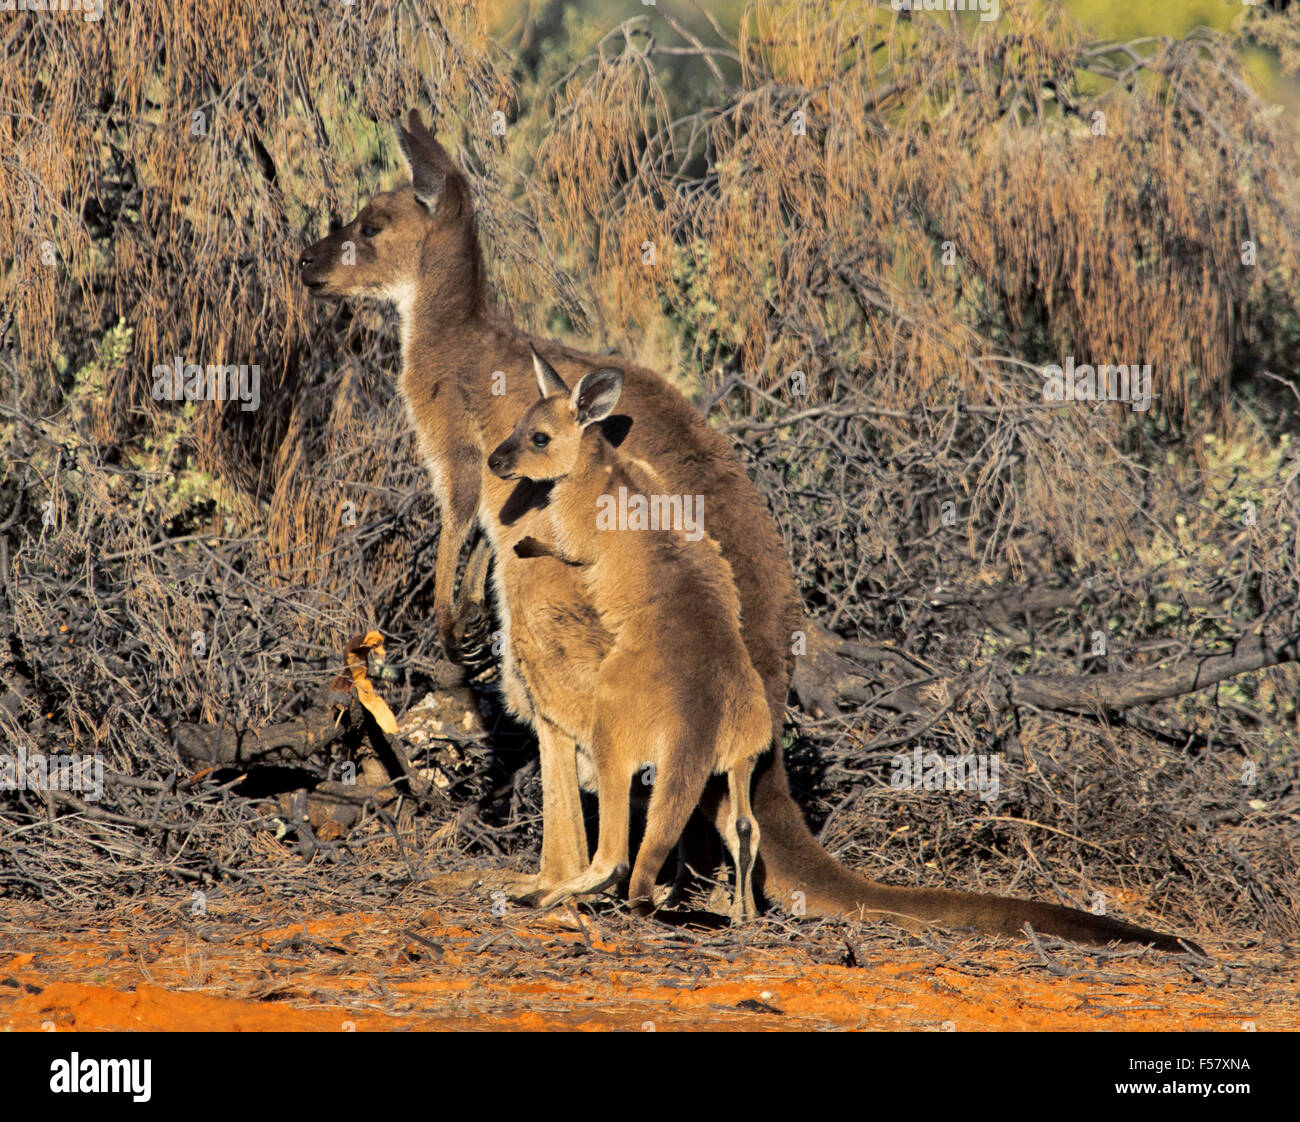 Young western grey kangaroo, Macropus fuliginosus, in the wild, climbing on its mother's back during play, in outback Australia Stock Photo